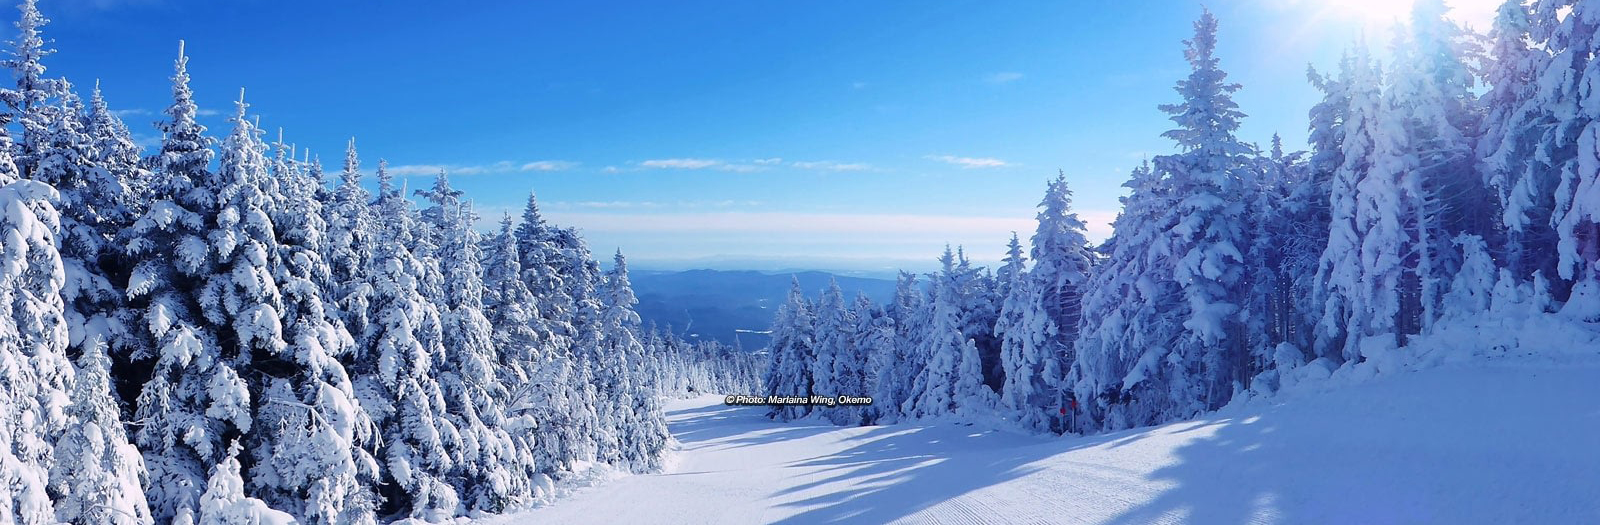 Okemo hotels and lodging 